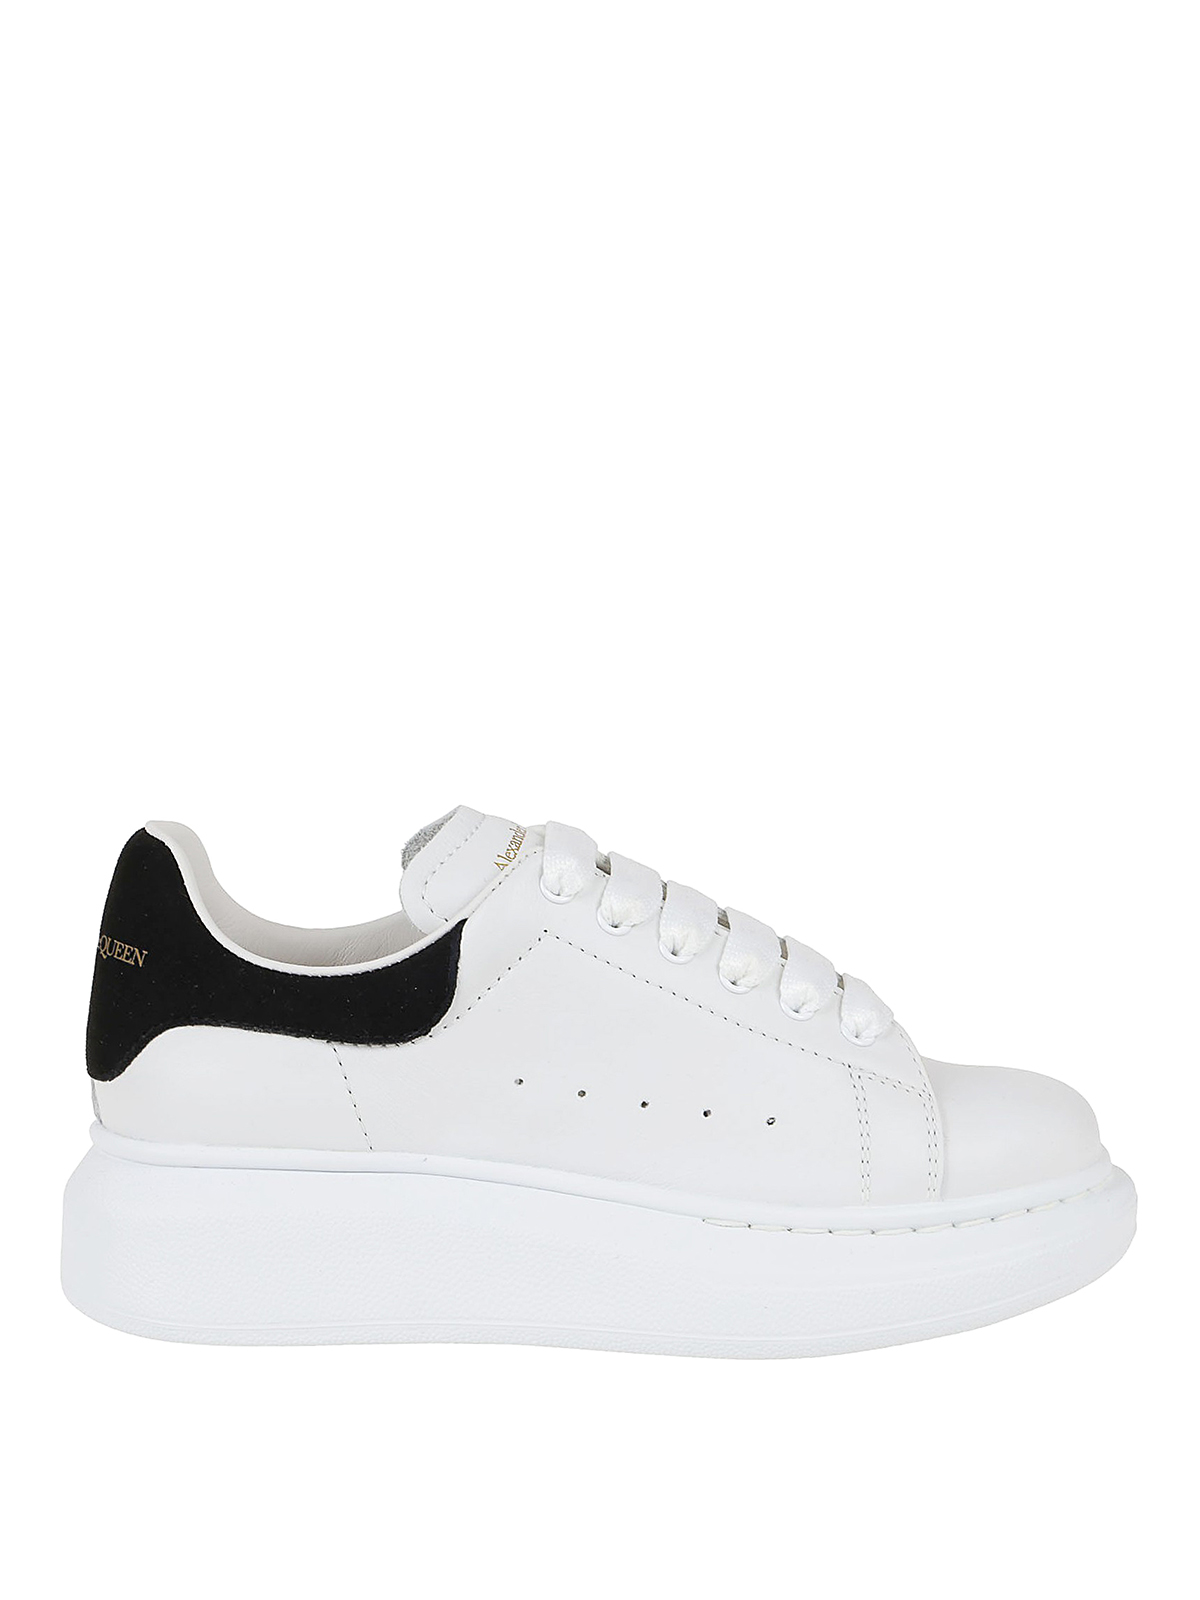 Trainers Alexander Mcqueen Kids - Kids Oversize sneakers in black and white  - 587691WHX111070